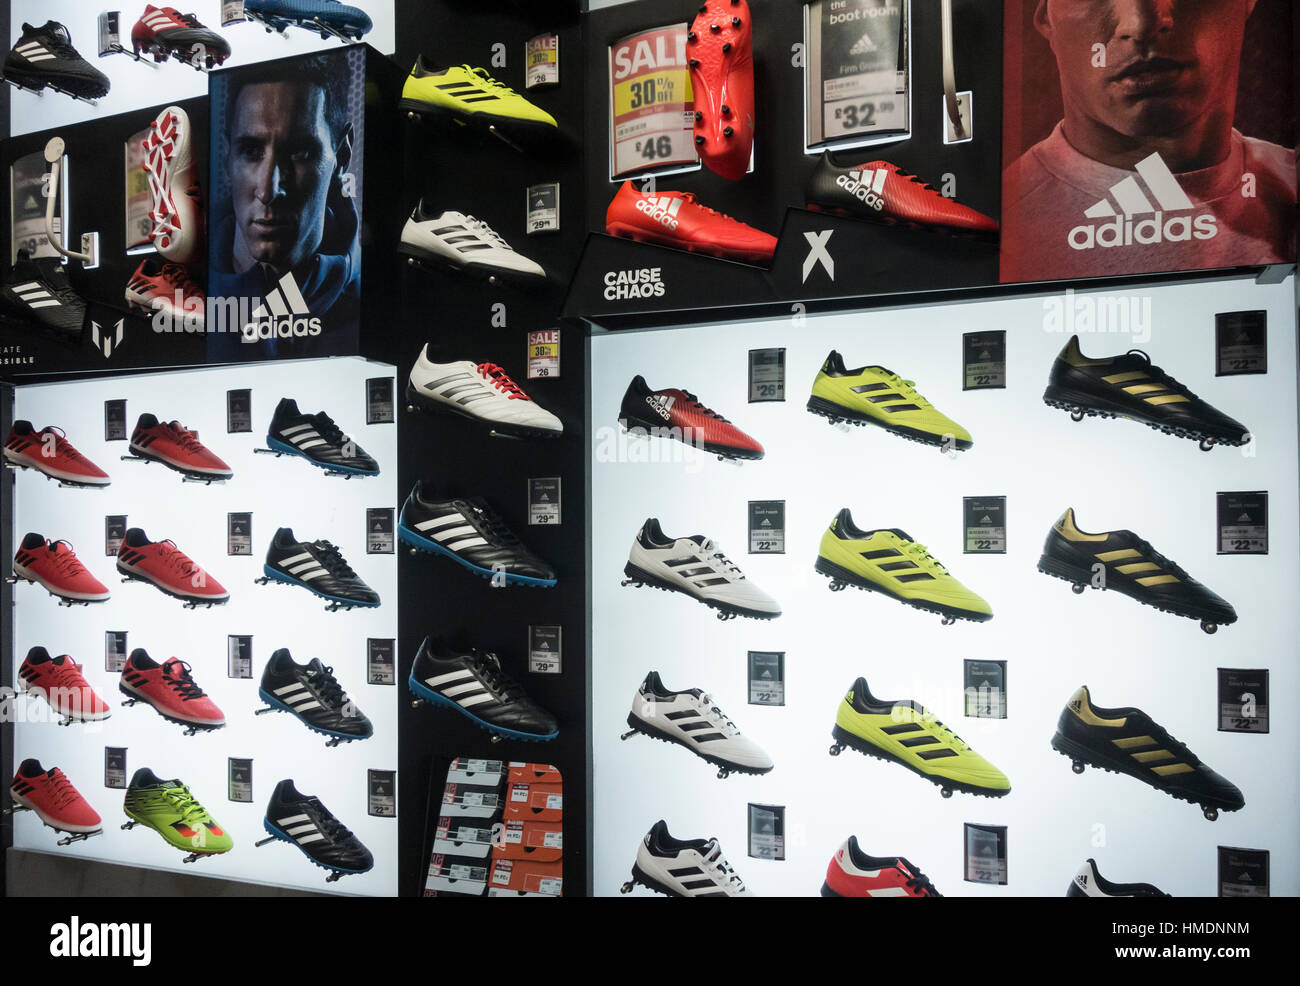 Adidas football boots in UK store Stock Photo - Alamy